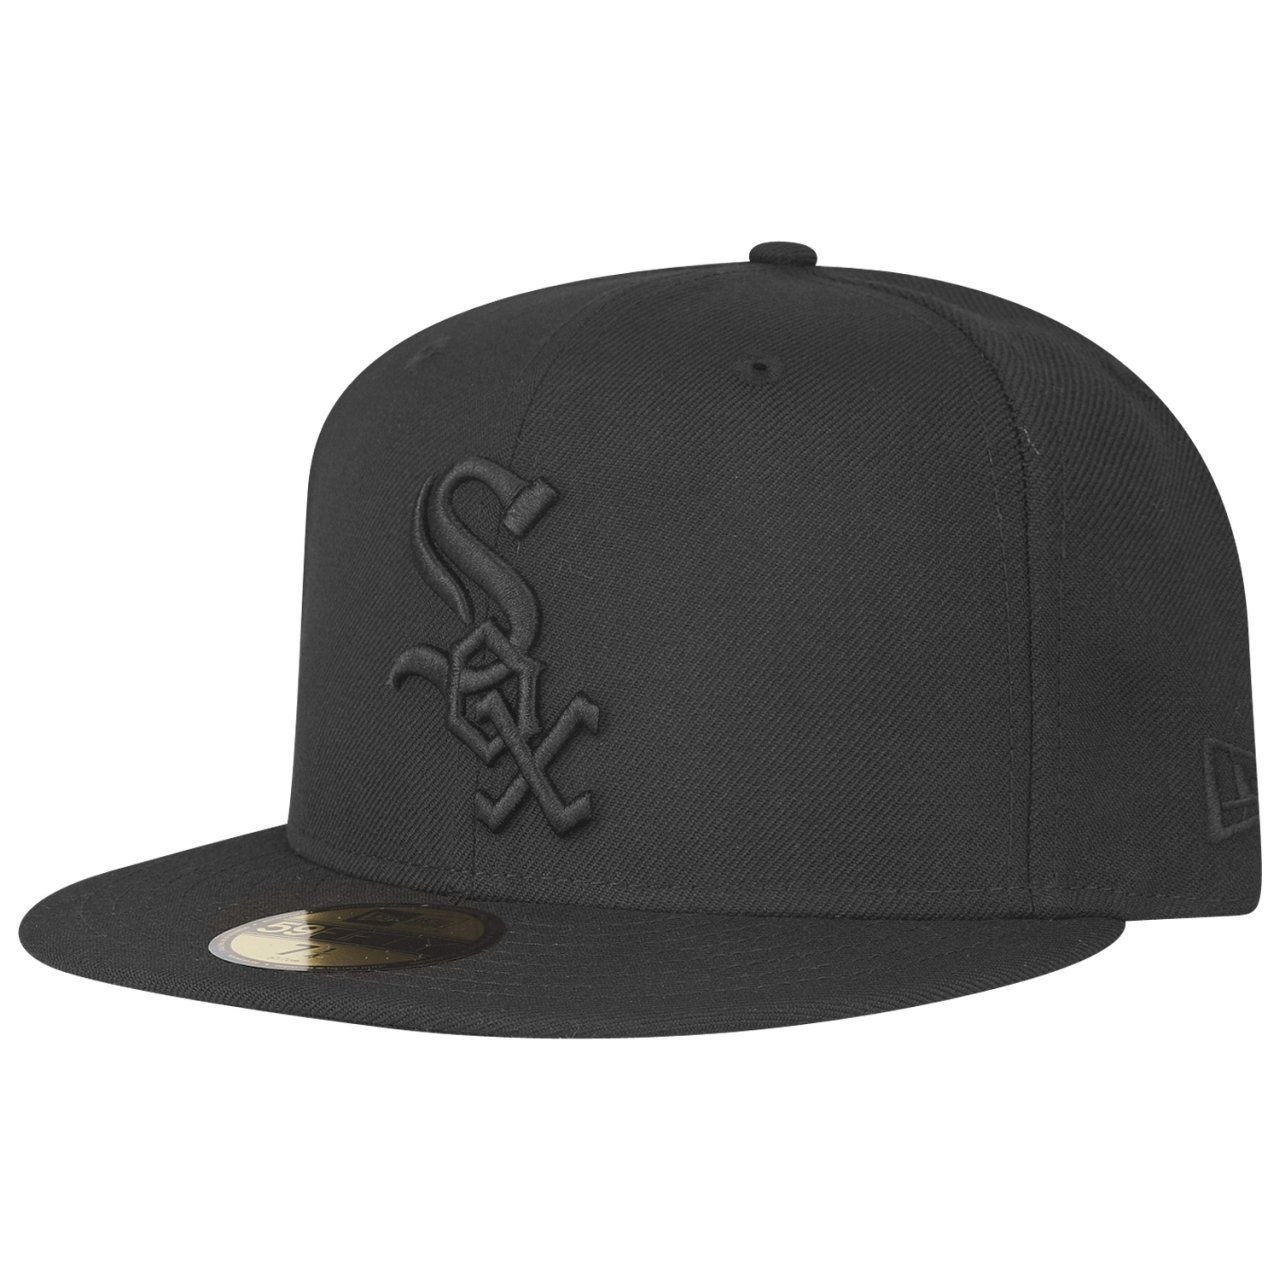 New Fitted White Sox MLB Era Chicago Cap 59Fifty